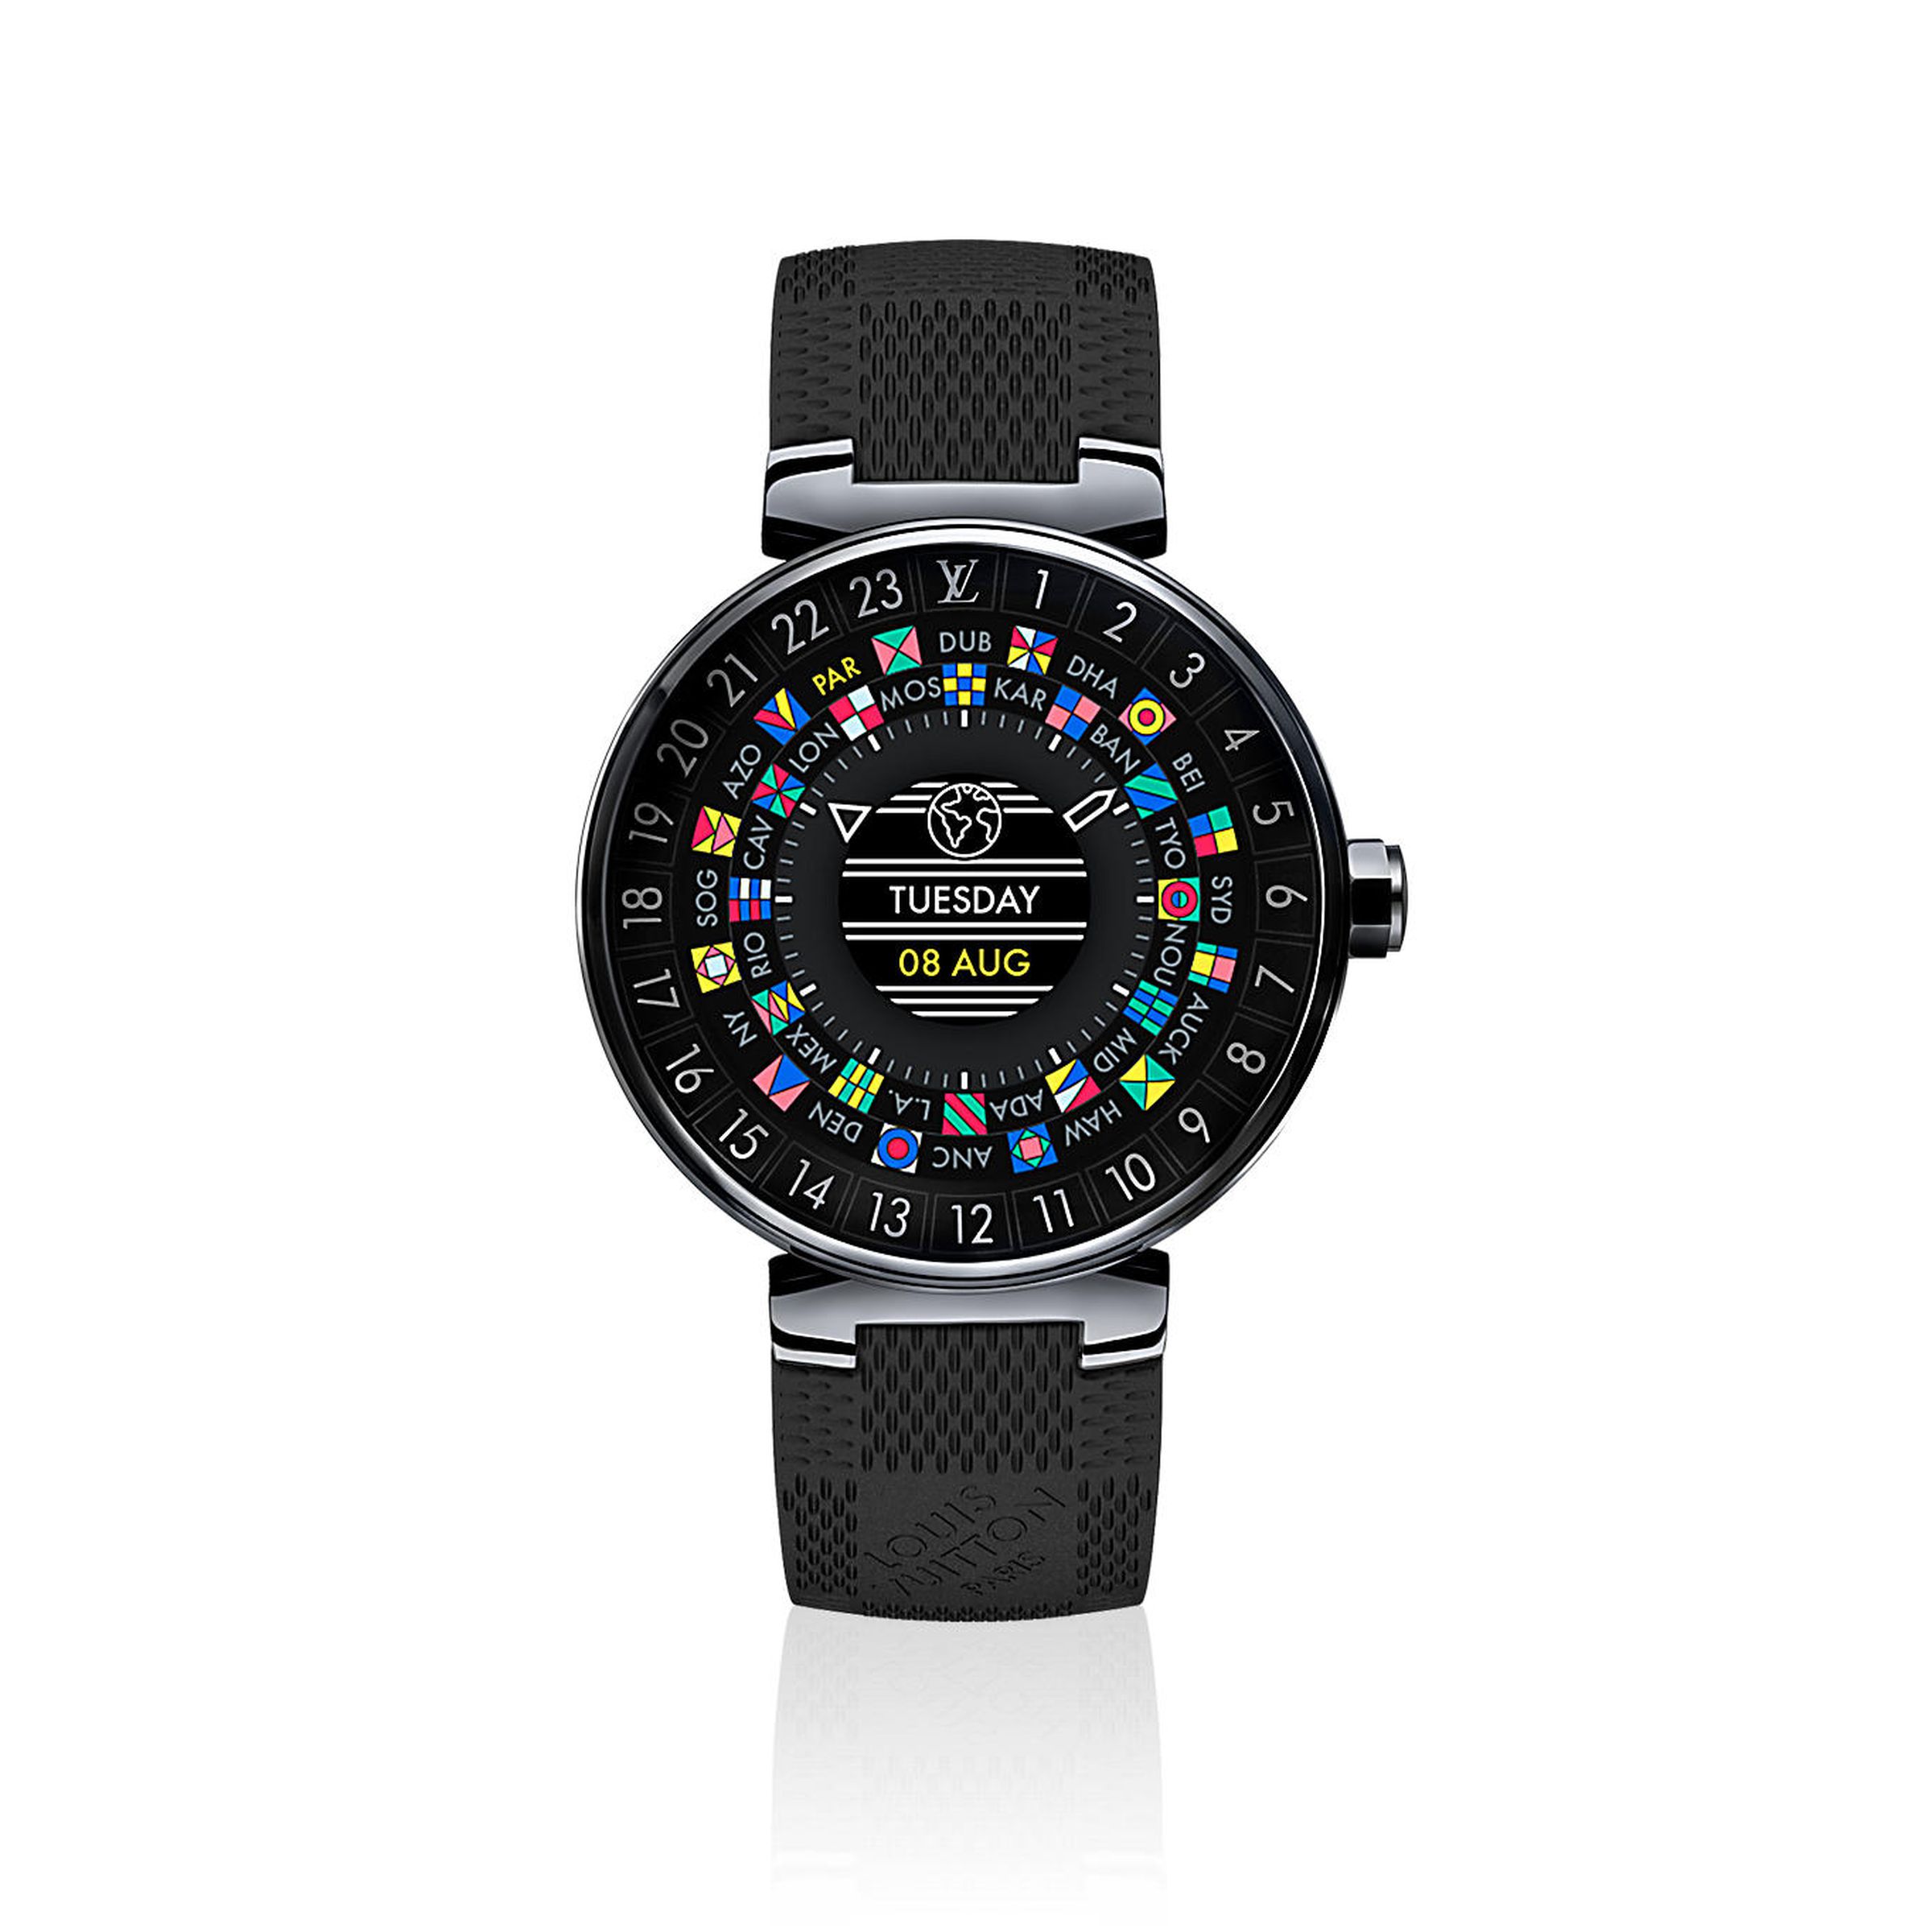 Louis Vuitton’s first smartwatch, the Tambour Horizon launched in 2017, ran Google’s operating system